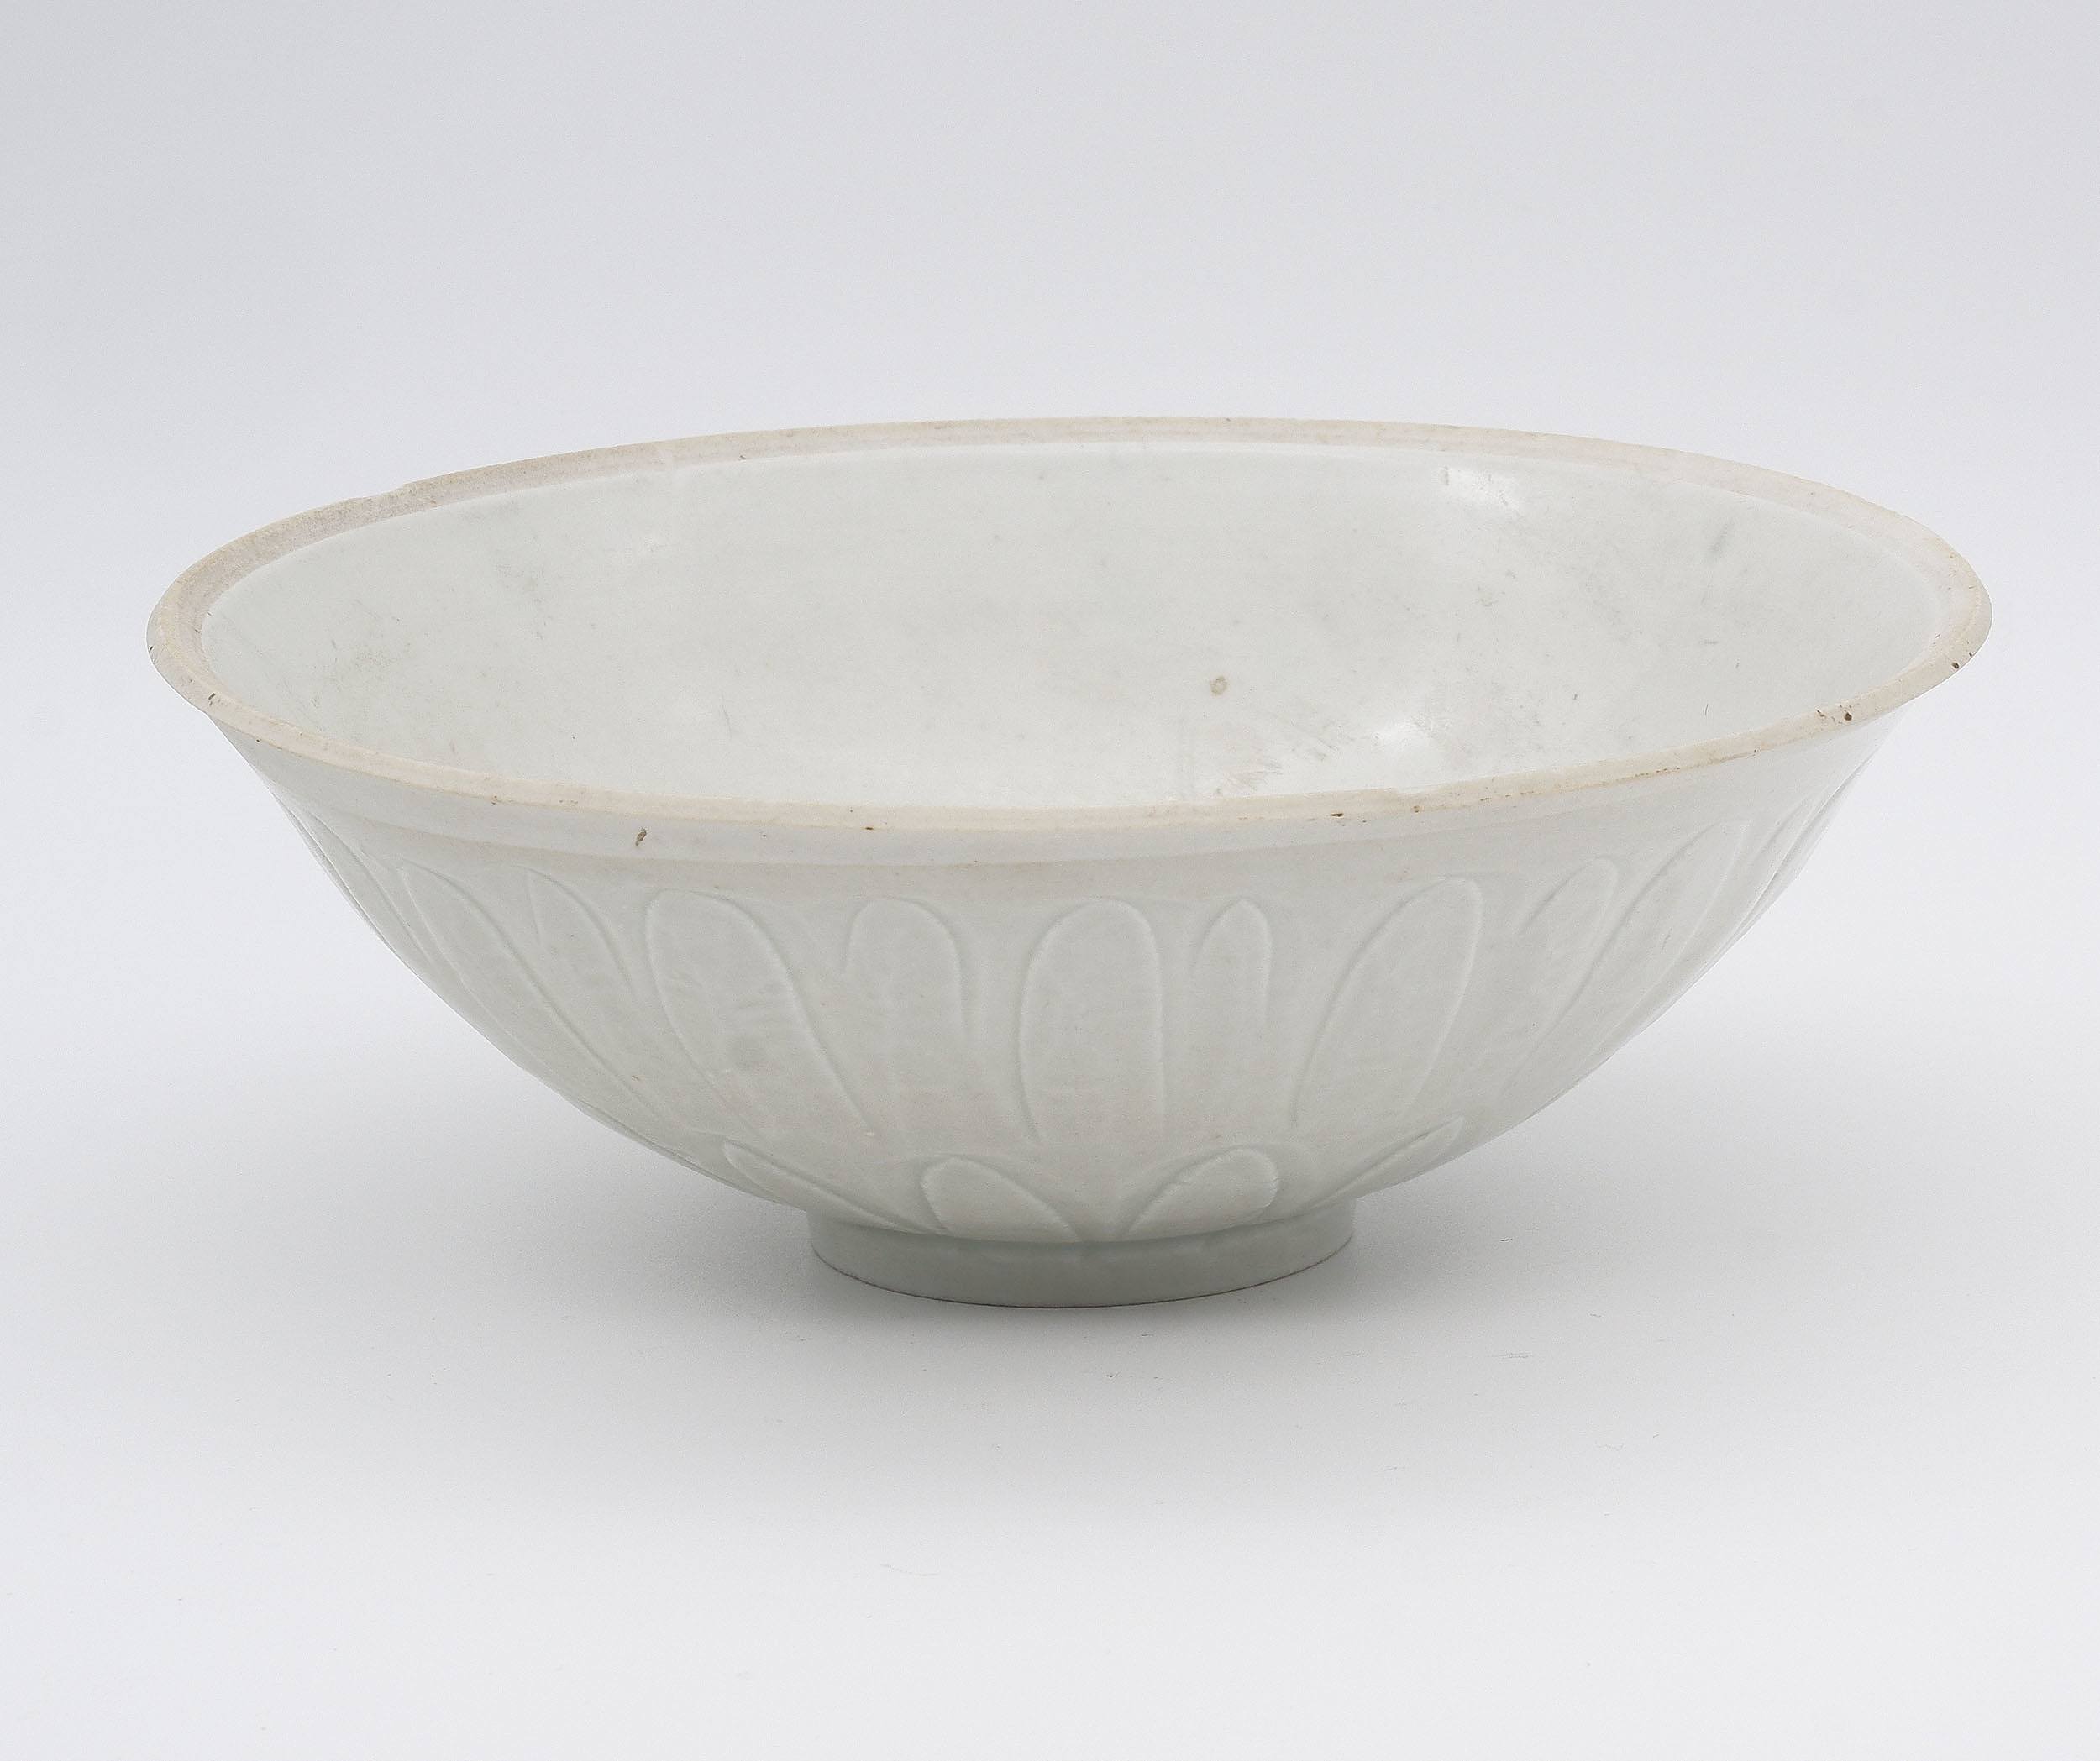 'Chinese Qingbai Carved Lotus Bowl, Song Dynasty or Later'